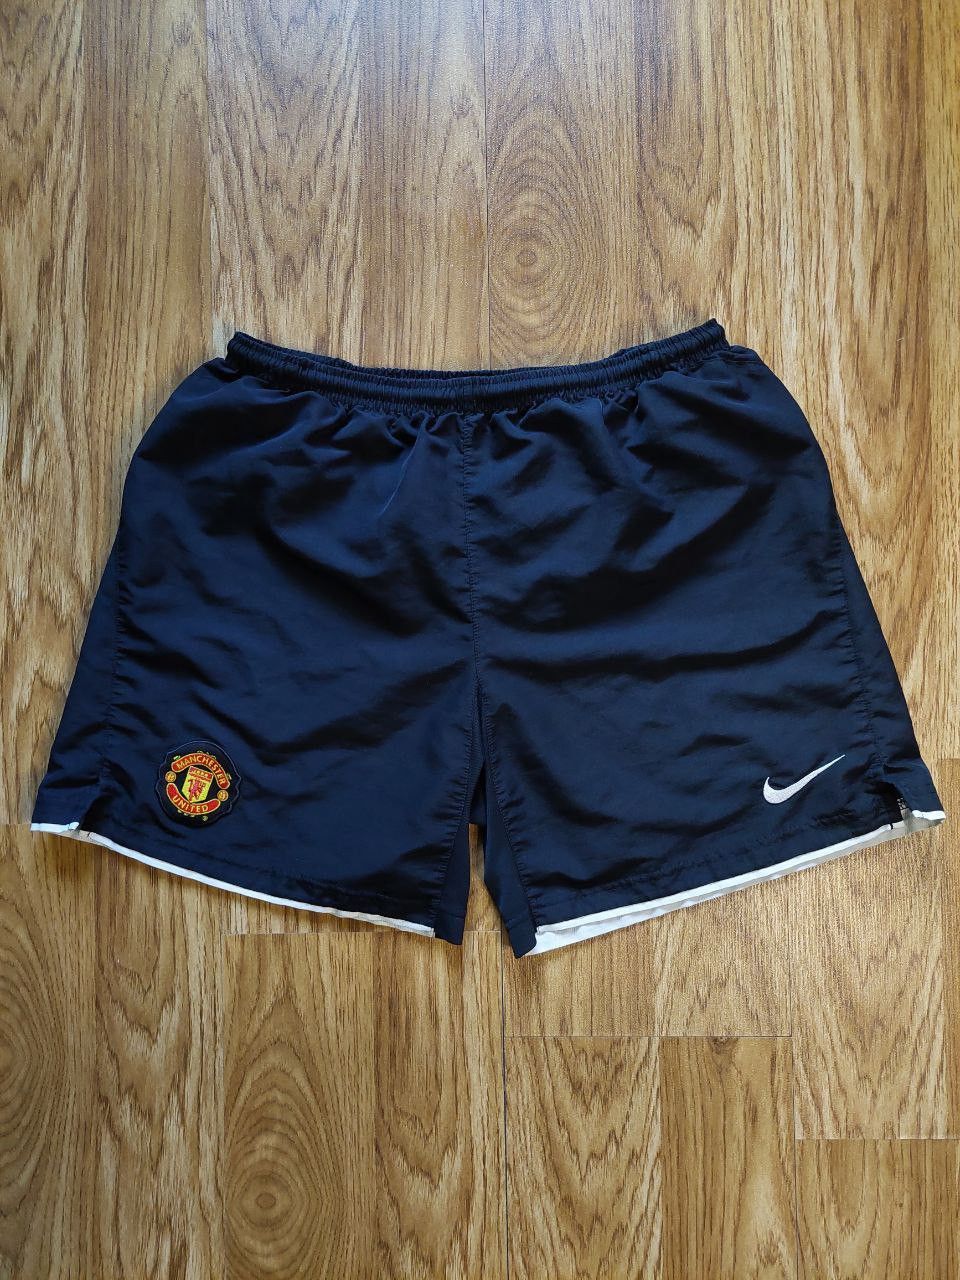 Pre-owned Nike X Soccer Jersey Vintage Nike Manchester United Black Shorts 00s